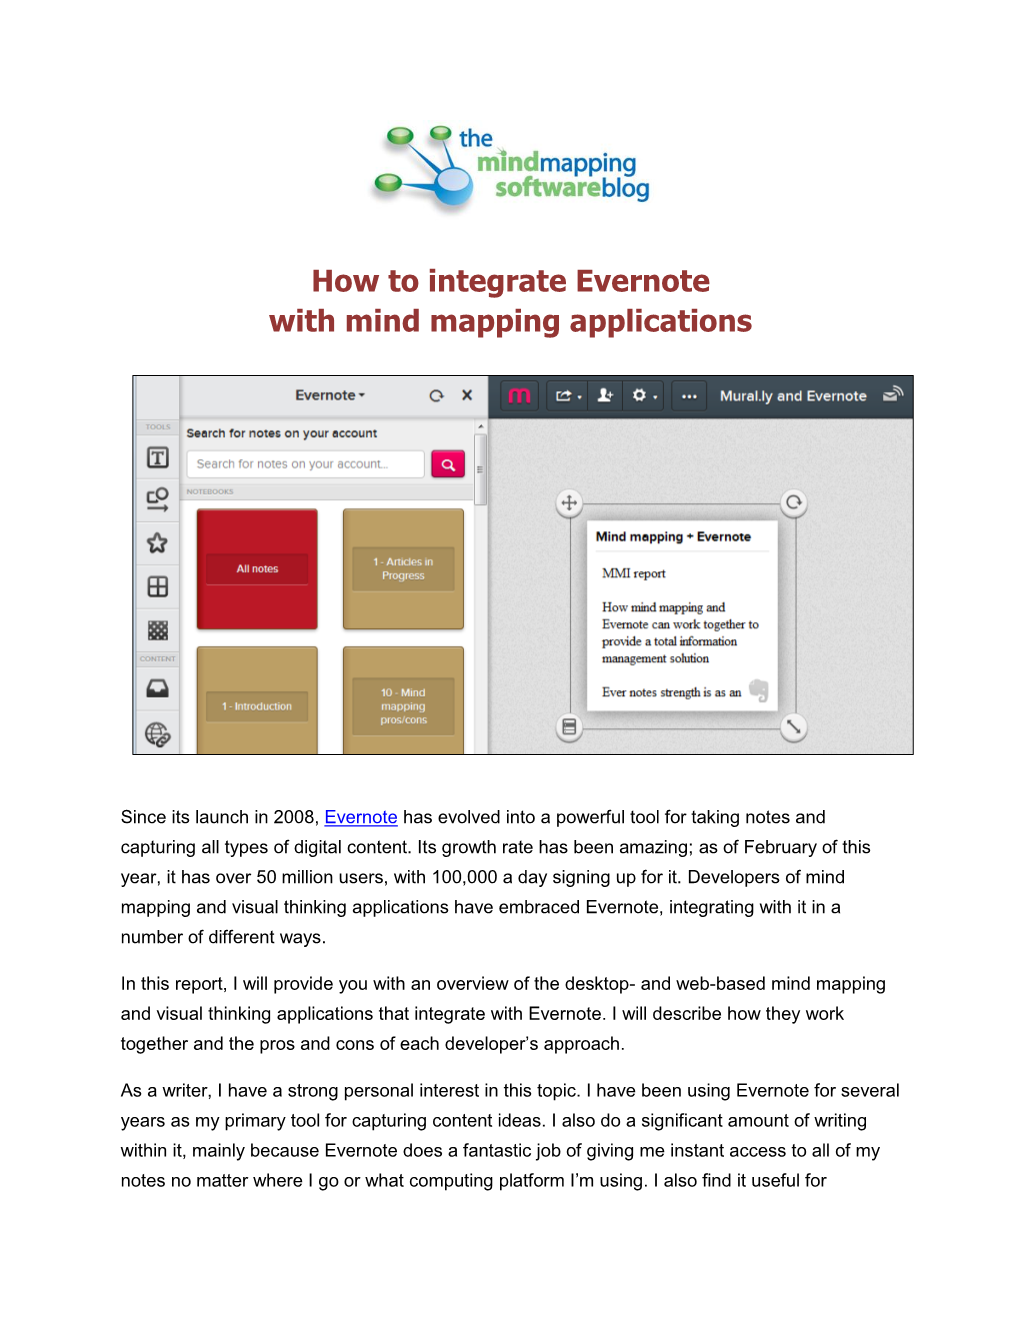 How to Integrate Evernote with Mind Mapping Applications